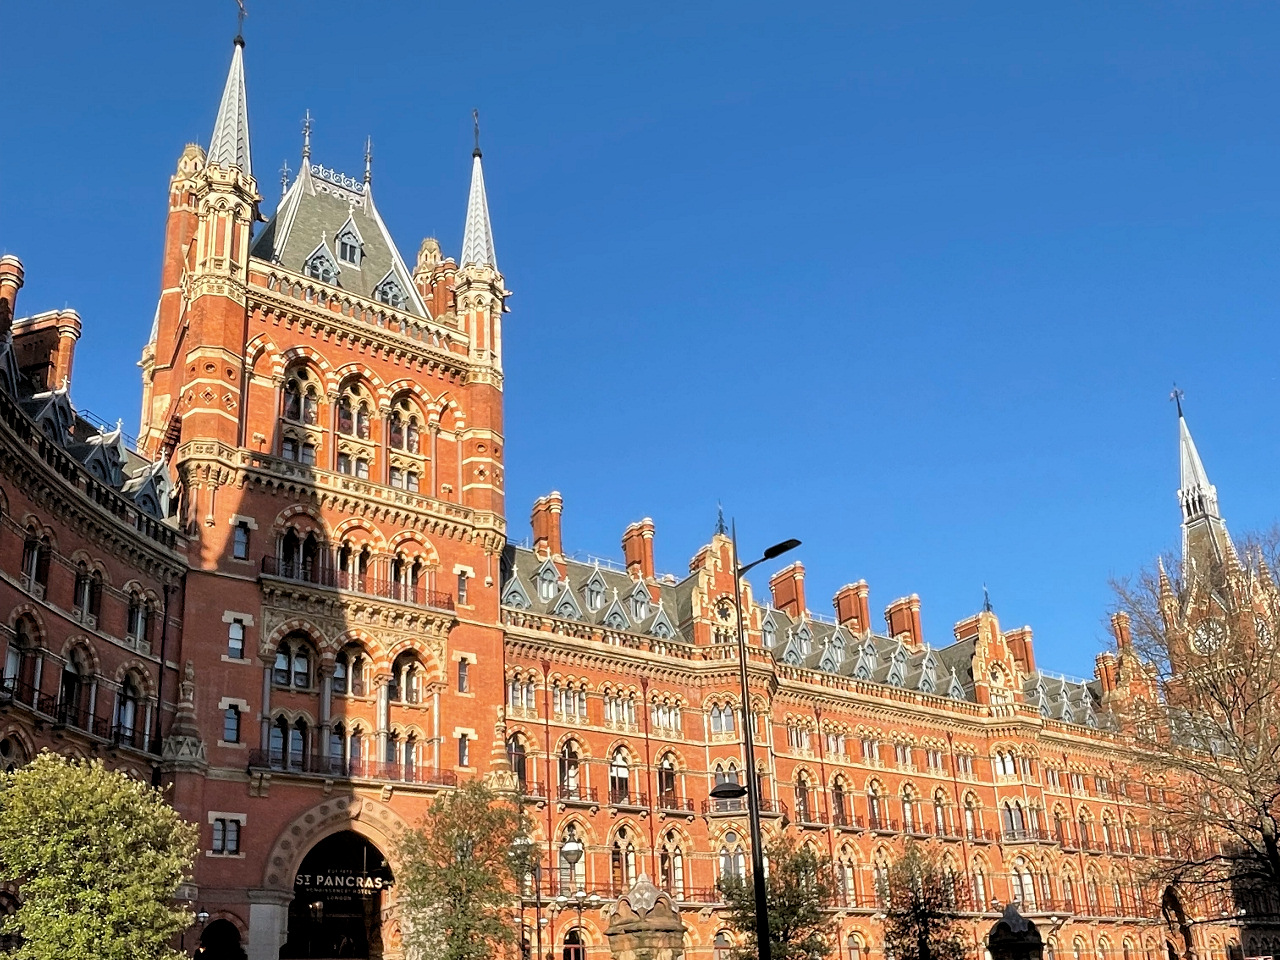 St Pancras station and hotel frontage